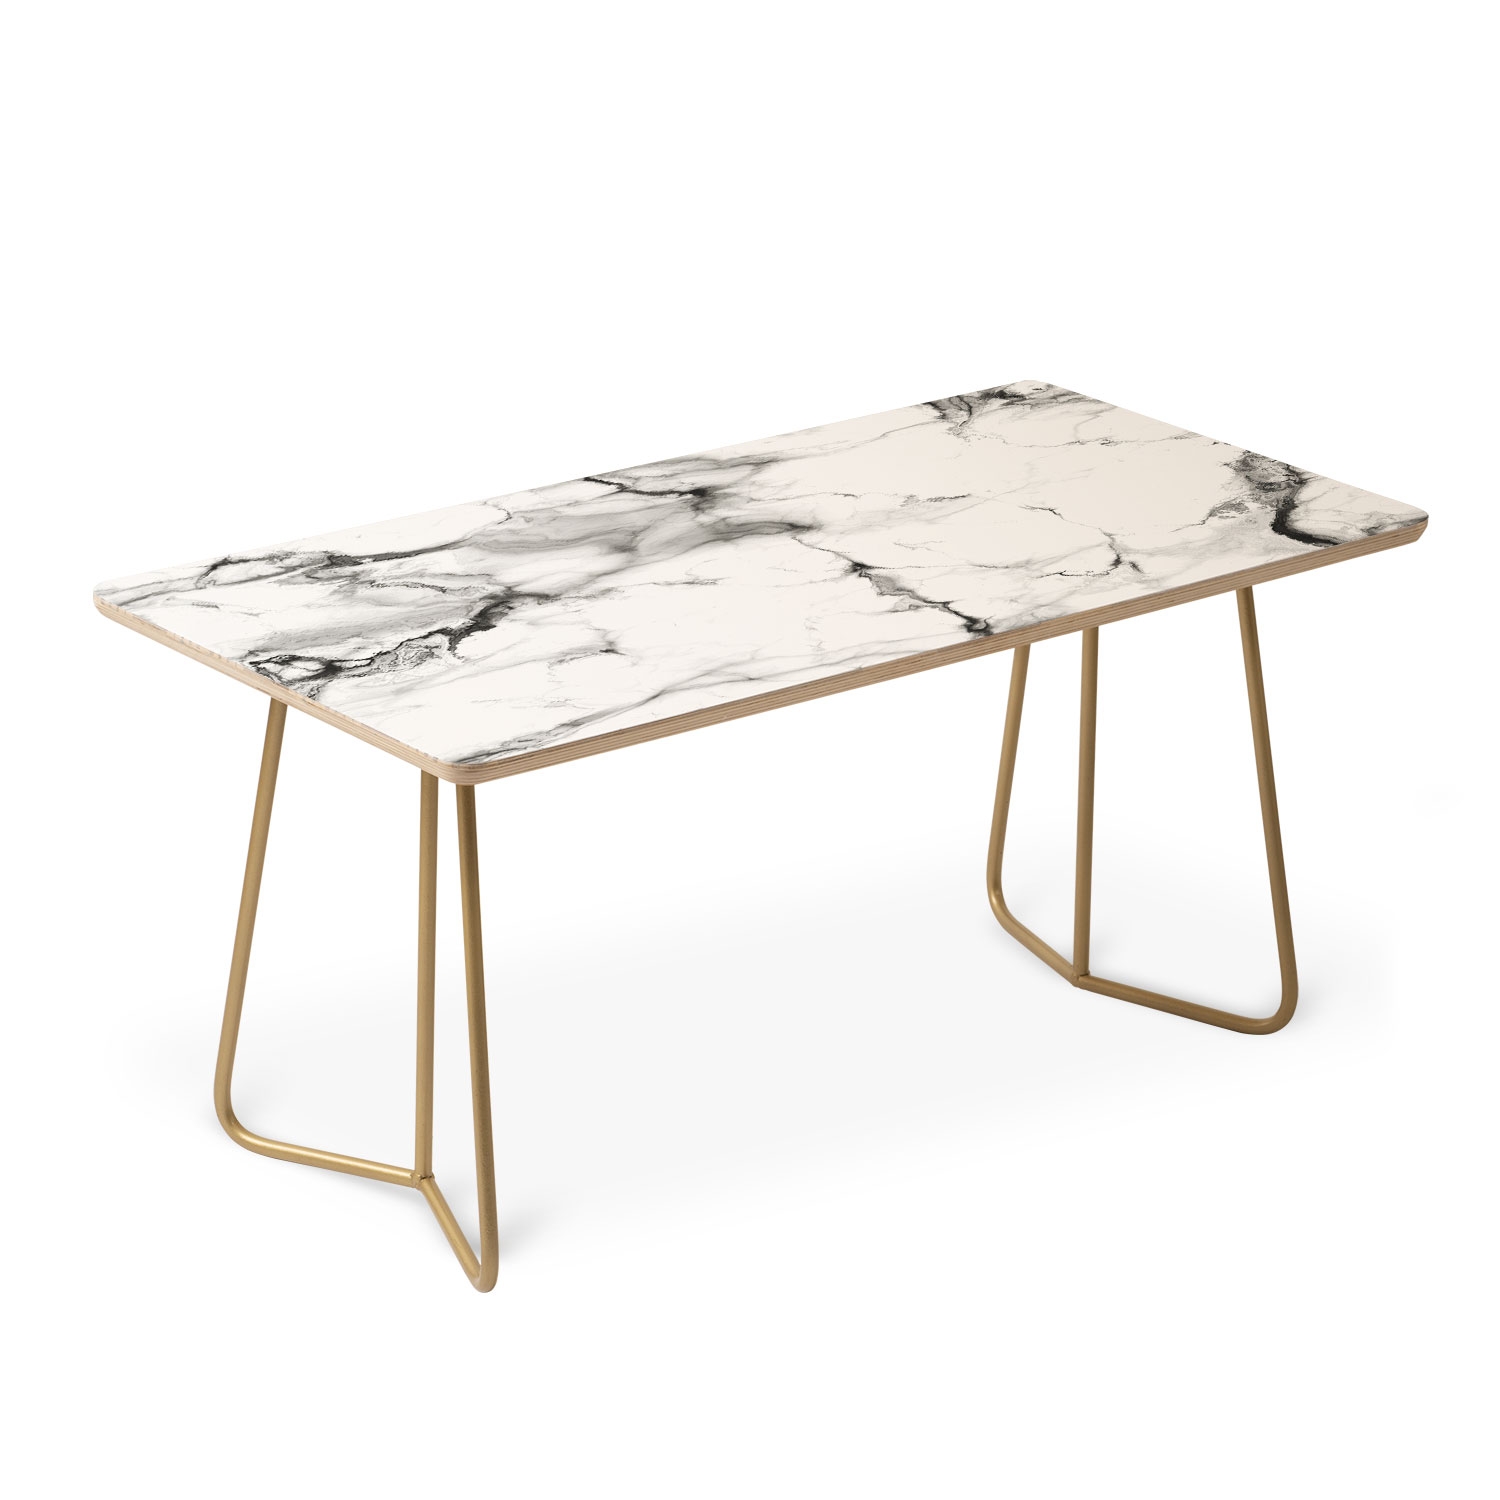 Marble by Chelsea Victoria - Coffee Table Black Aston Legs - Image 2